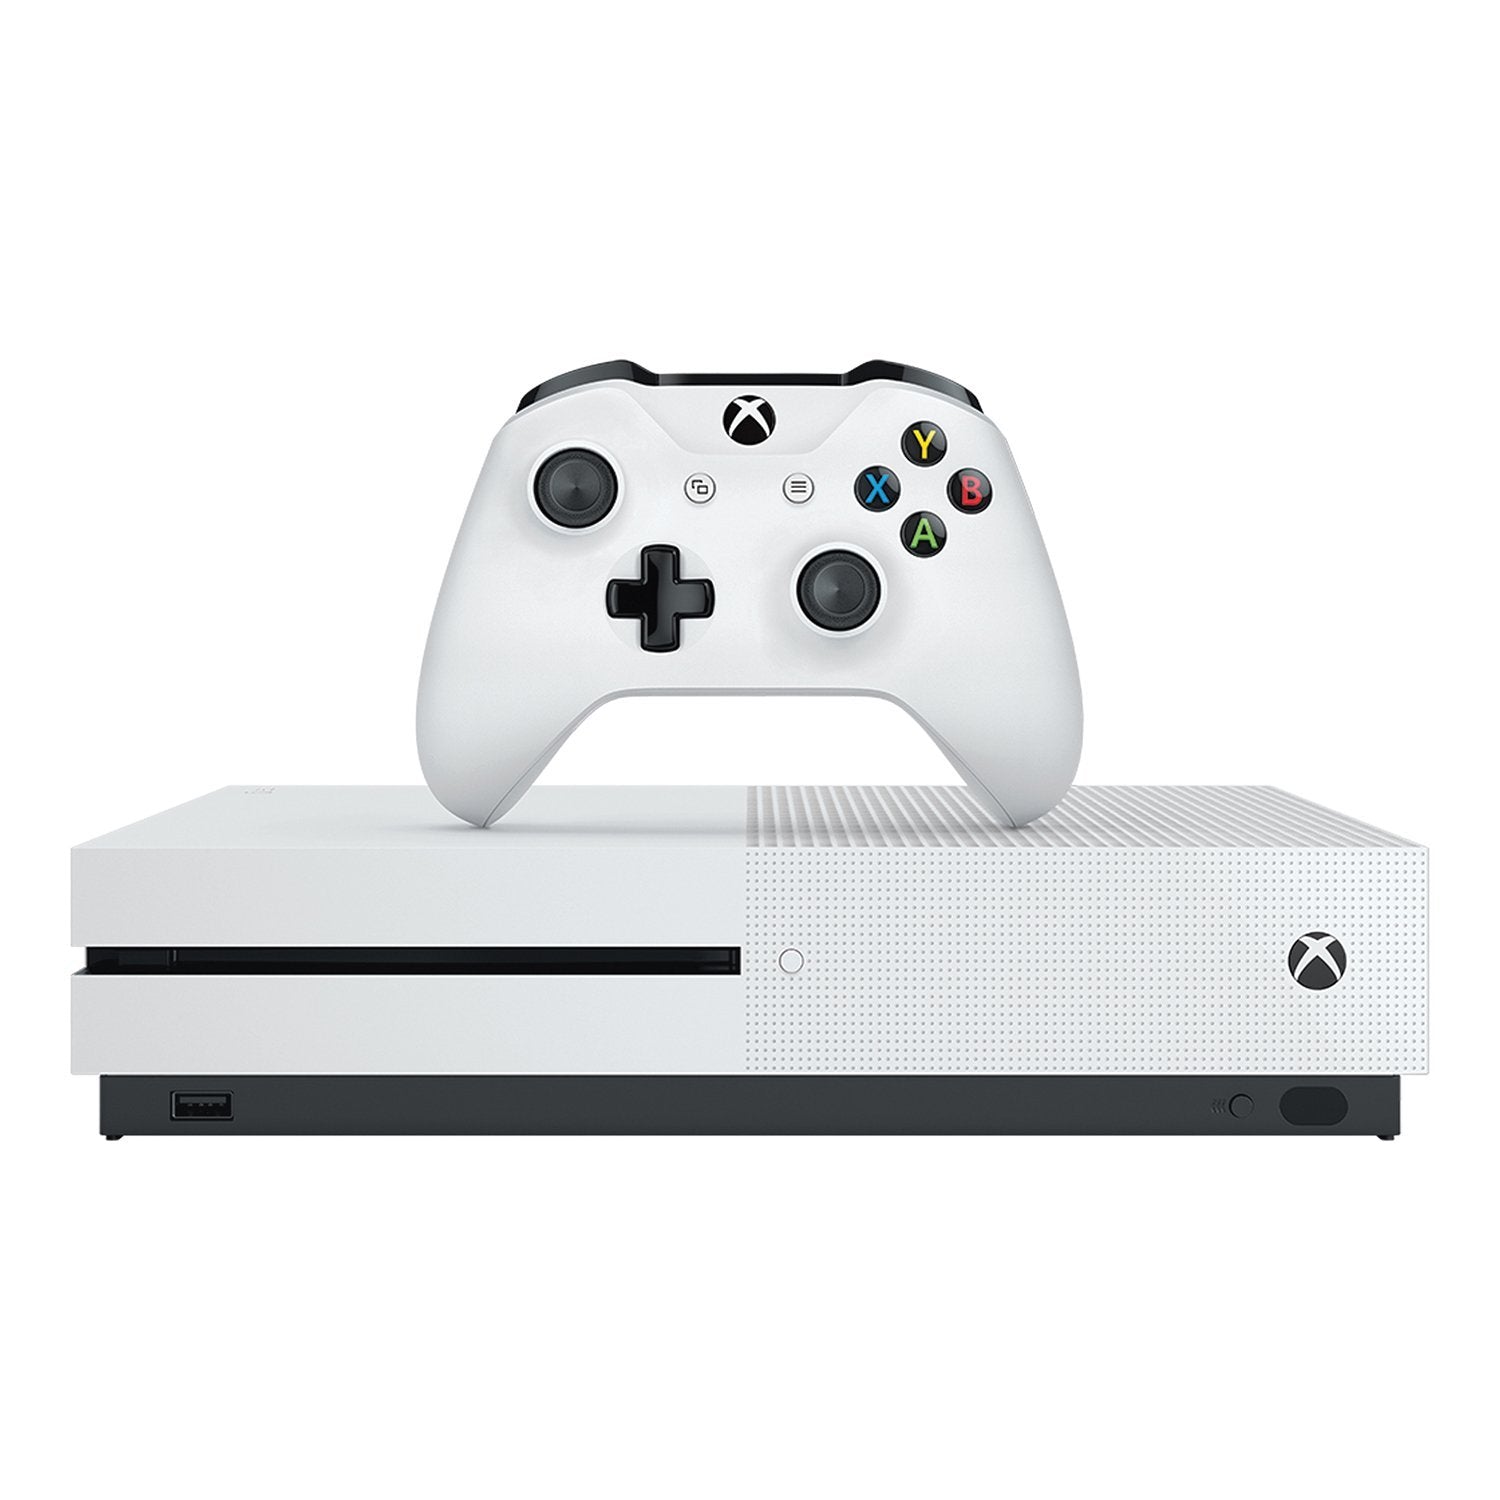 J2Games.com | Xbox One S 2 TB Console White (Xbox One) (Pre-Played - Game System).